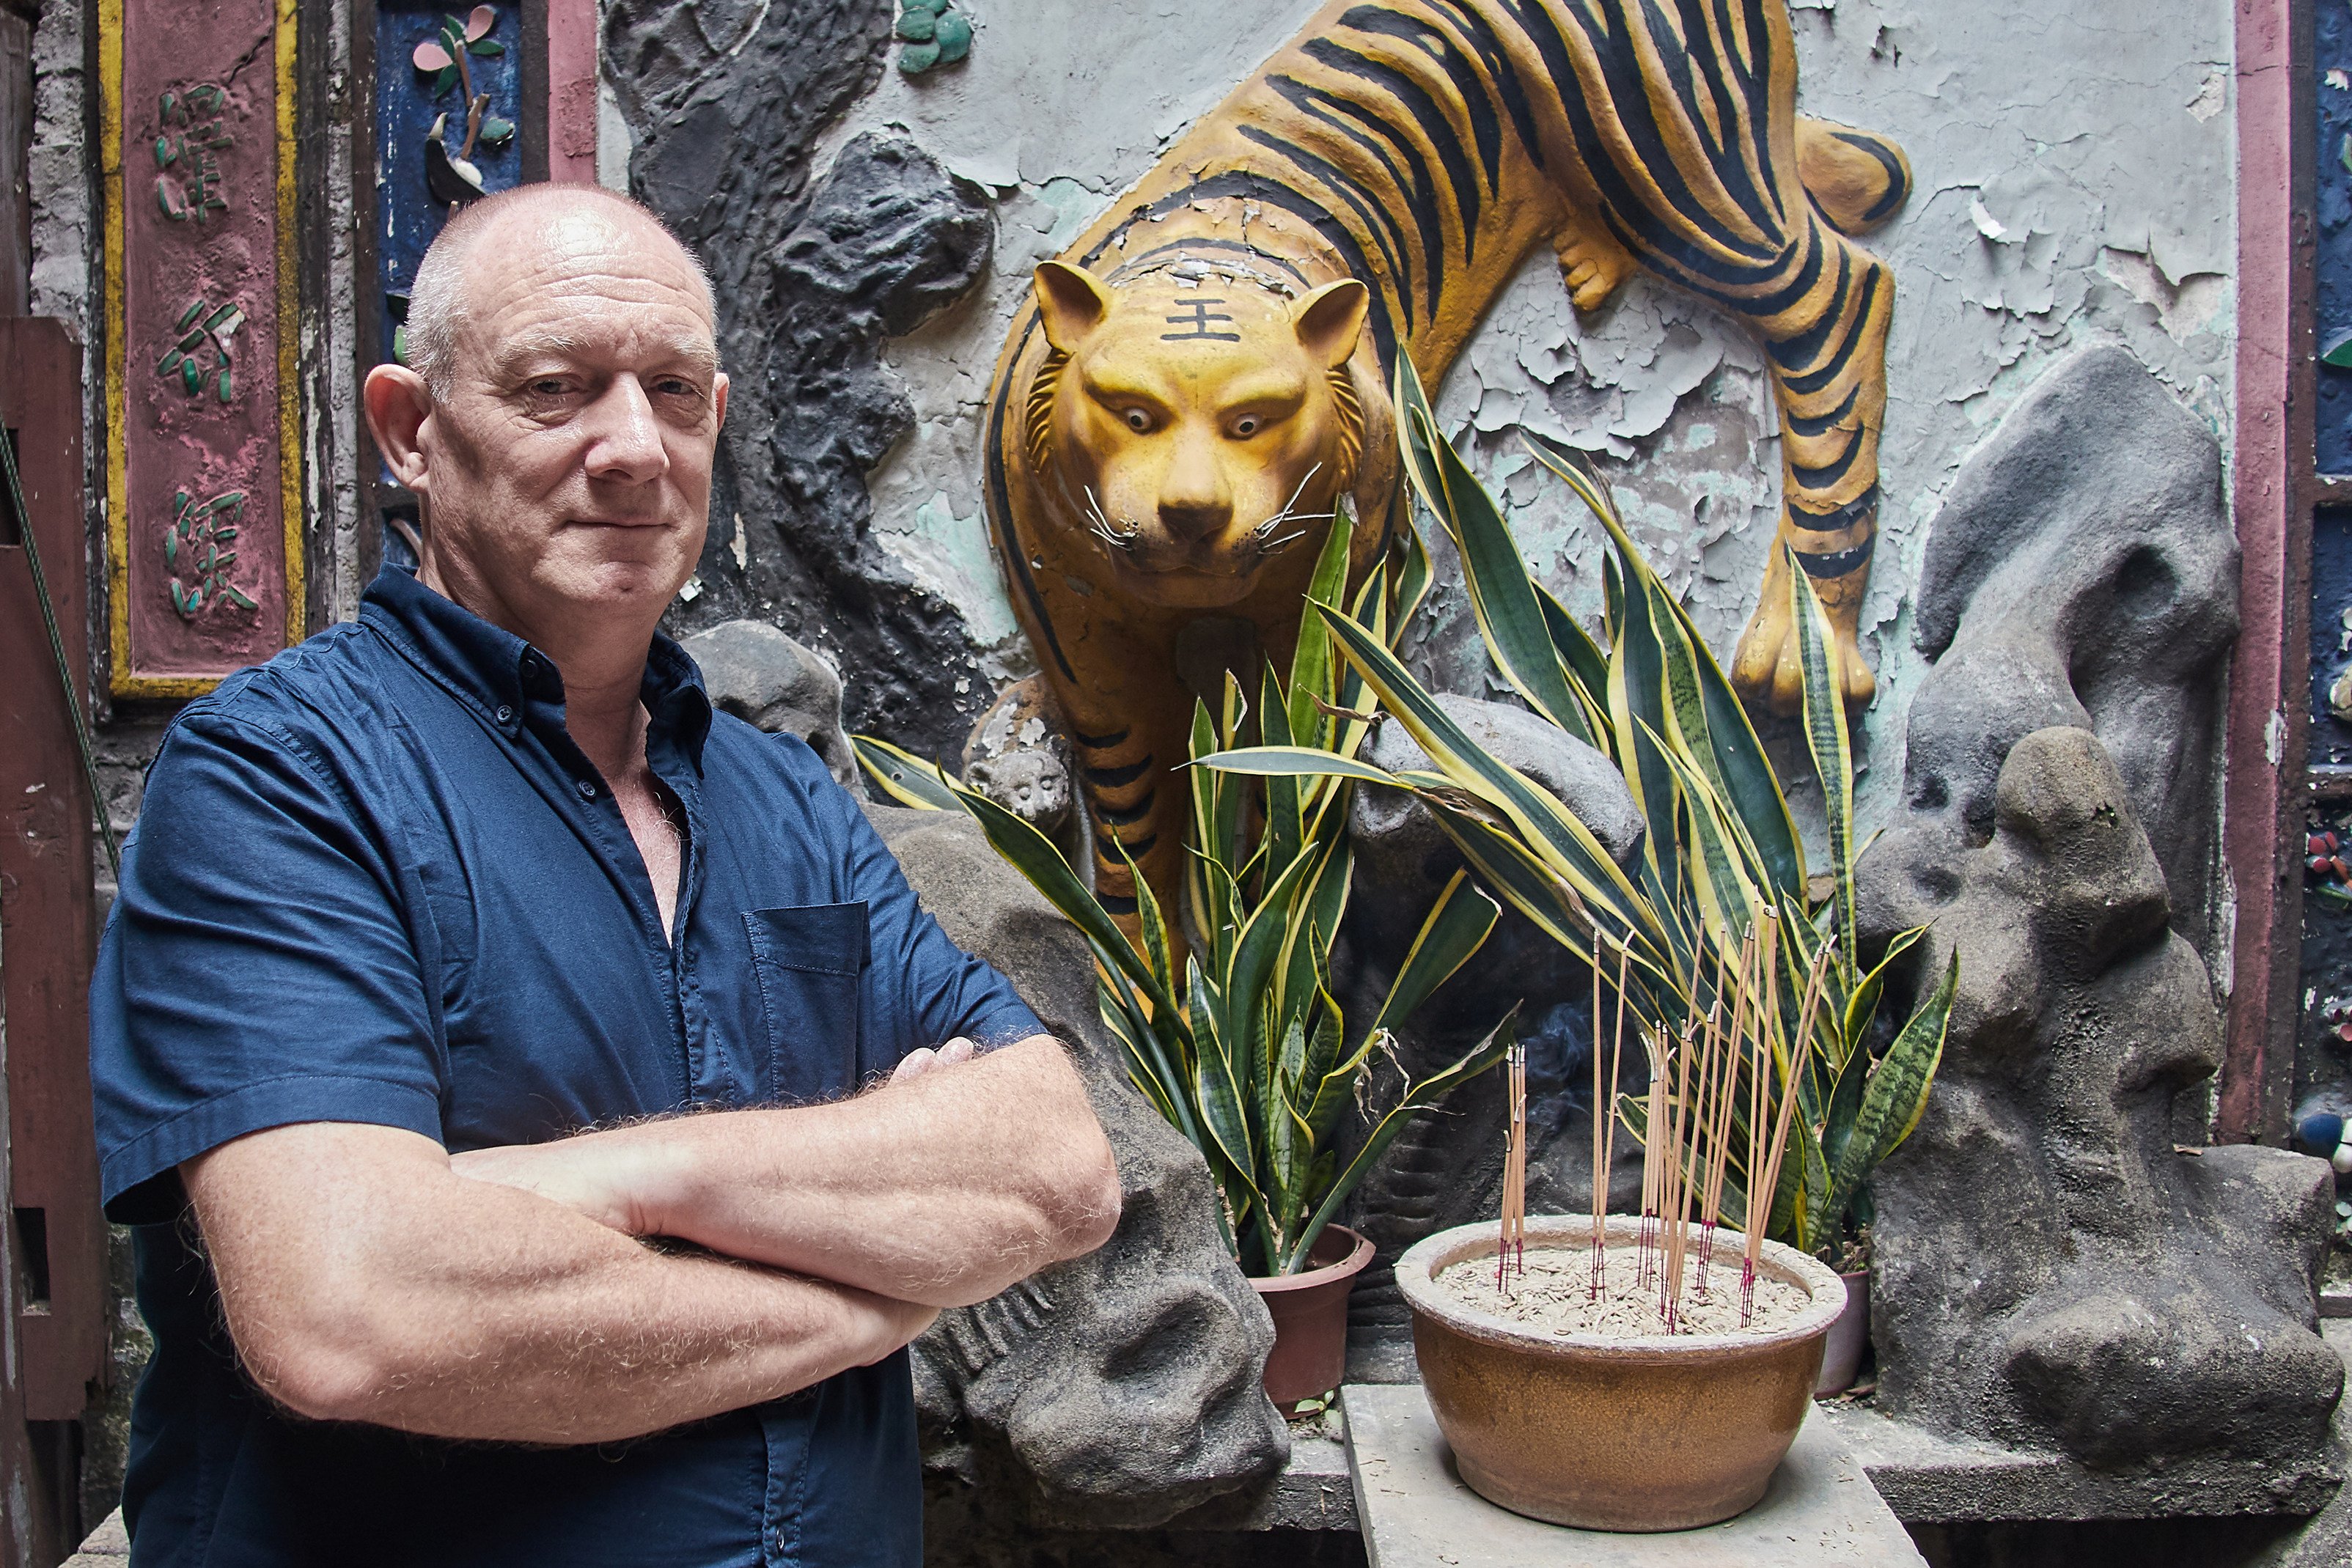 David Sutton has been living in Hong Kong for the last four decades. Photo: Handout